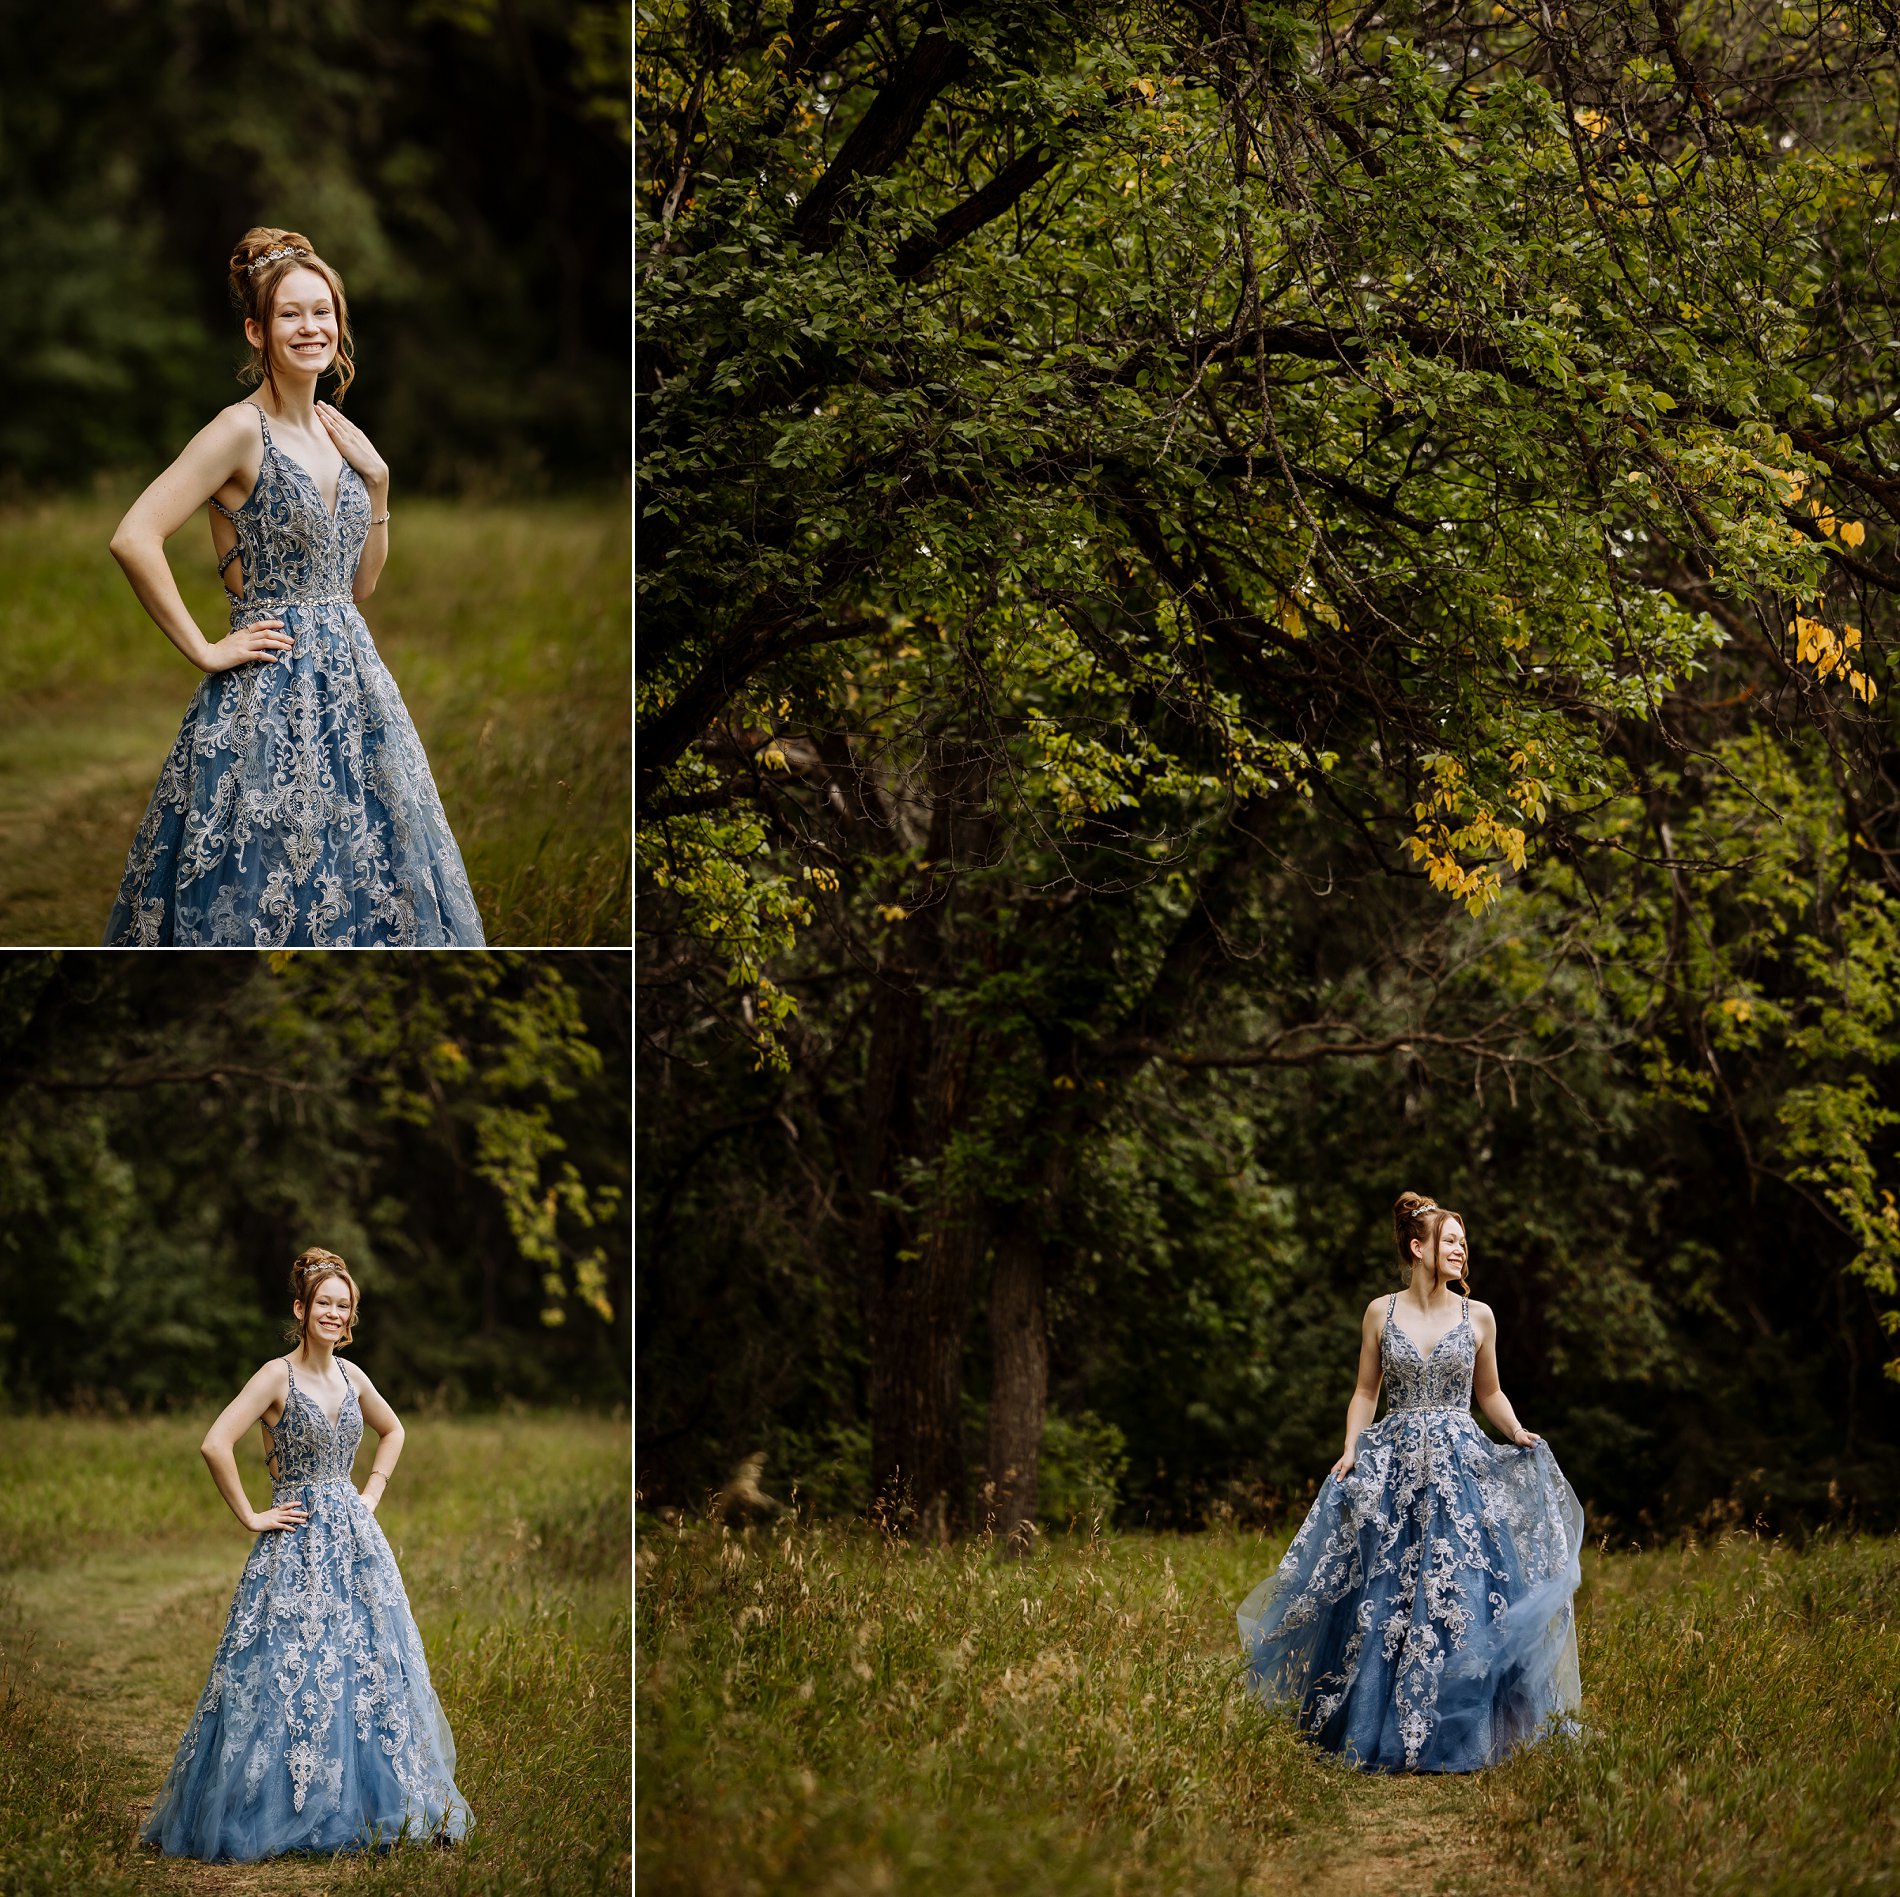 Holy Cross High School graduate in blue dress and tiara stands in a field of tall grass under tall trees.